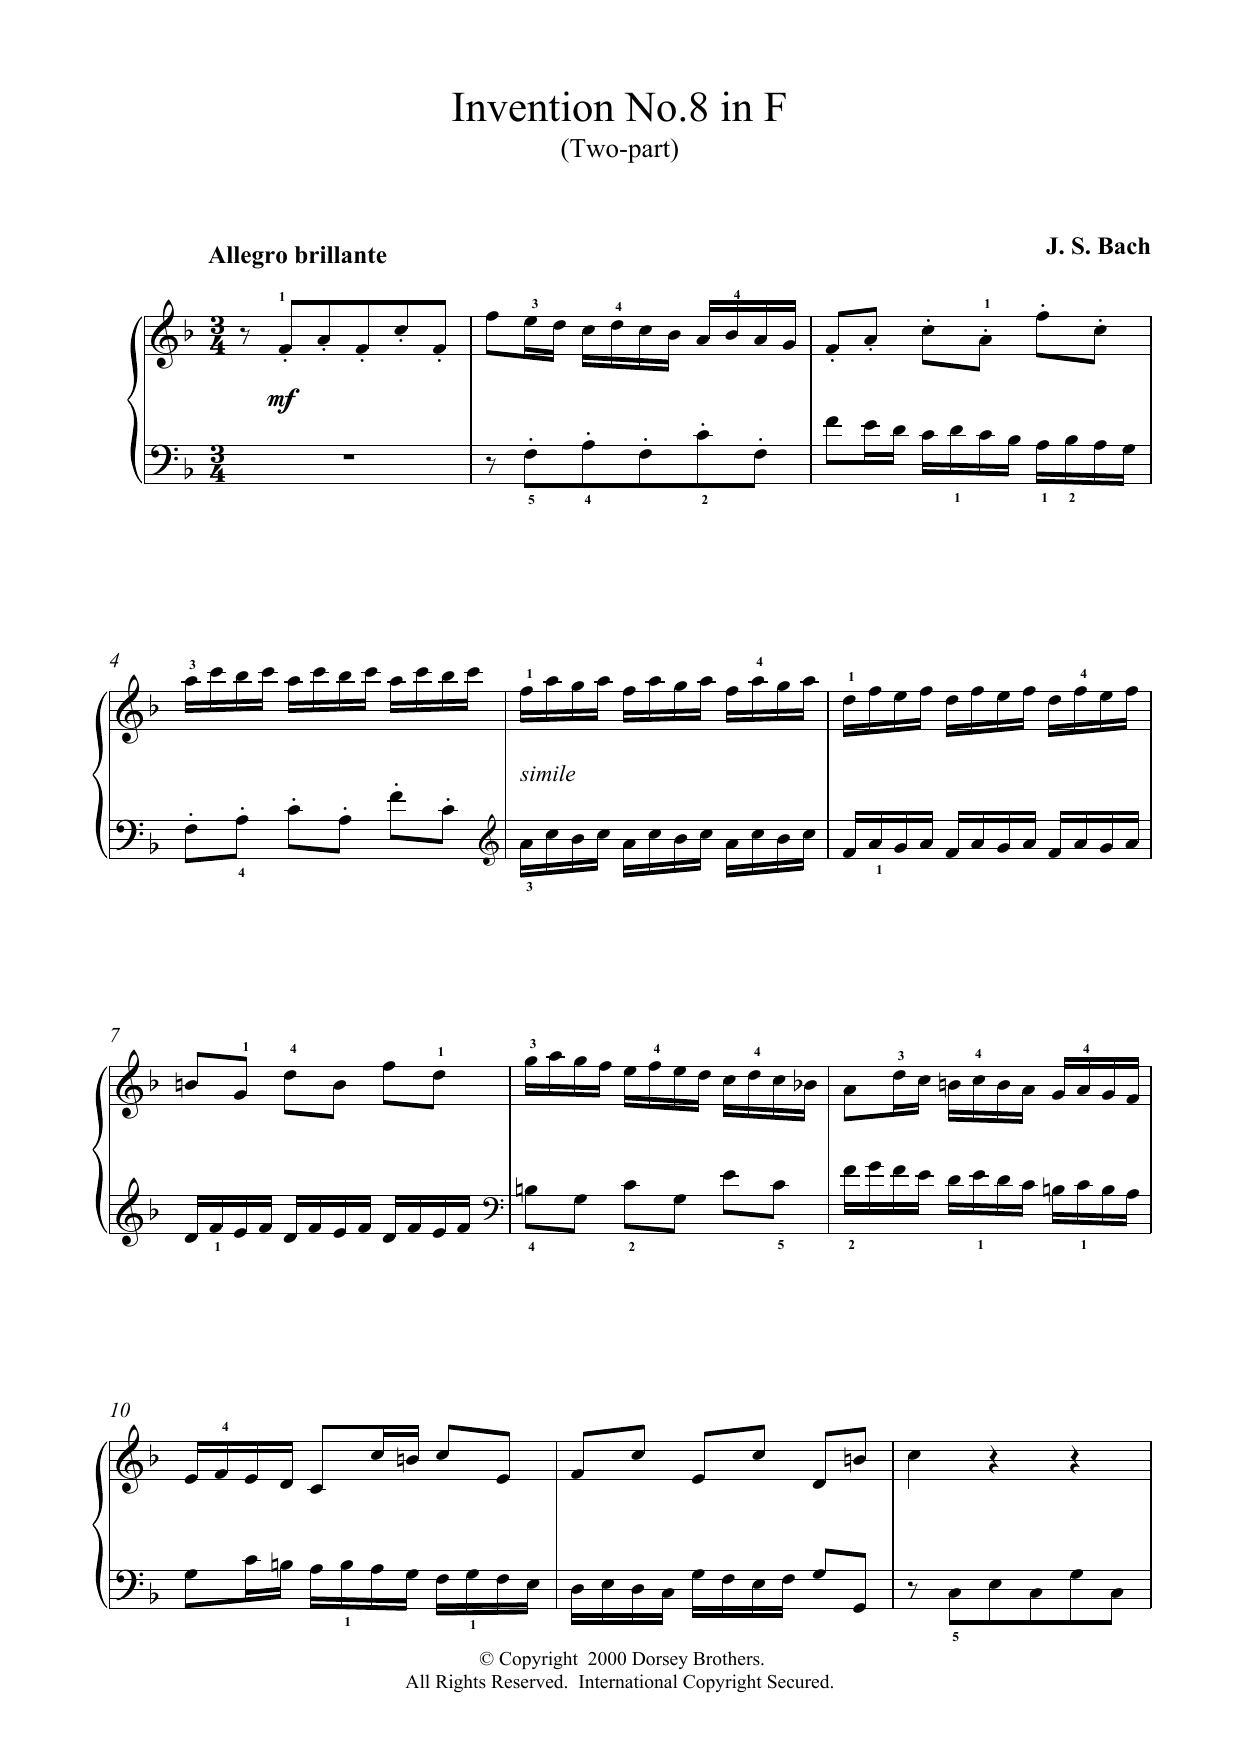 J.S. Bach Two-Part Invention No. 8 in F Major sheet music preview music notes and score for Piano including 2 page(s)